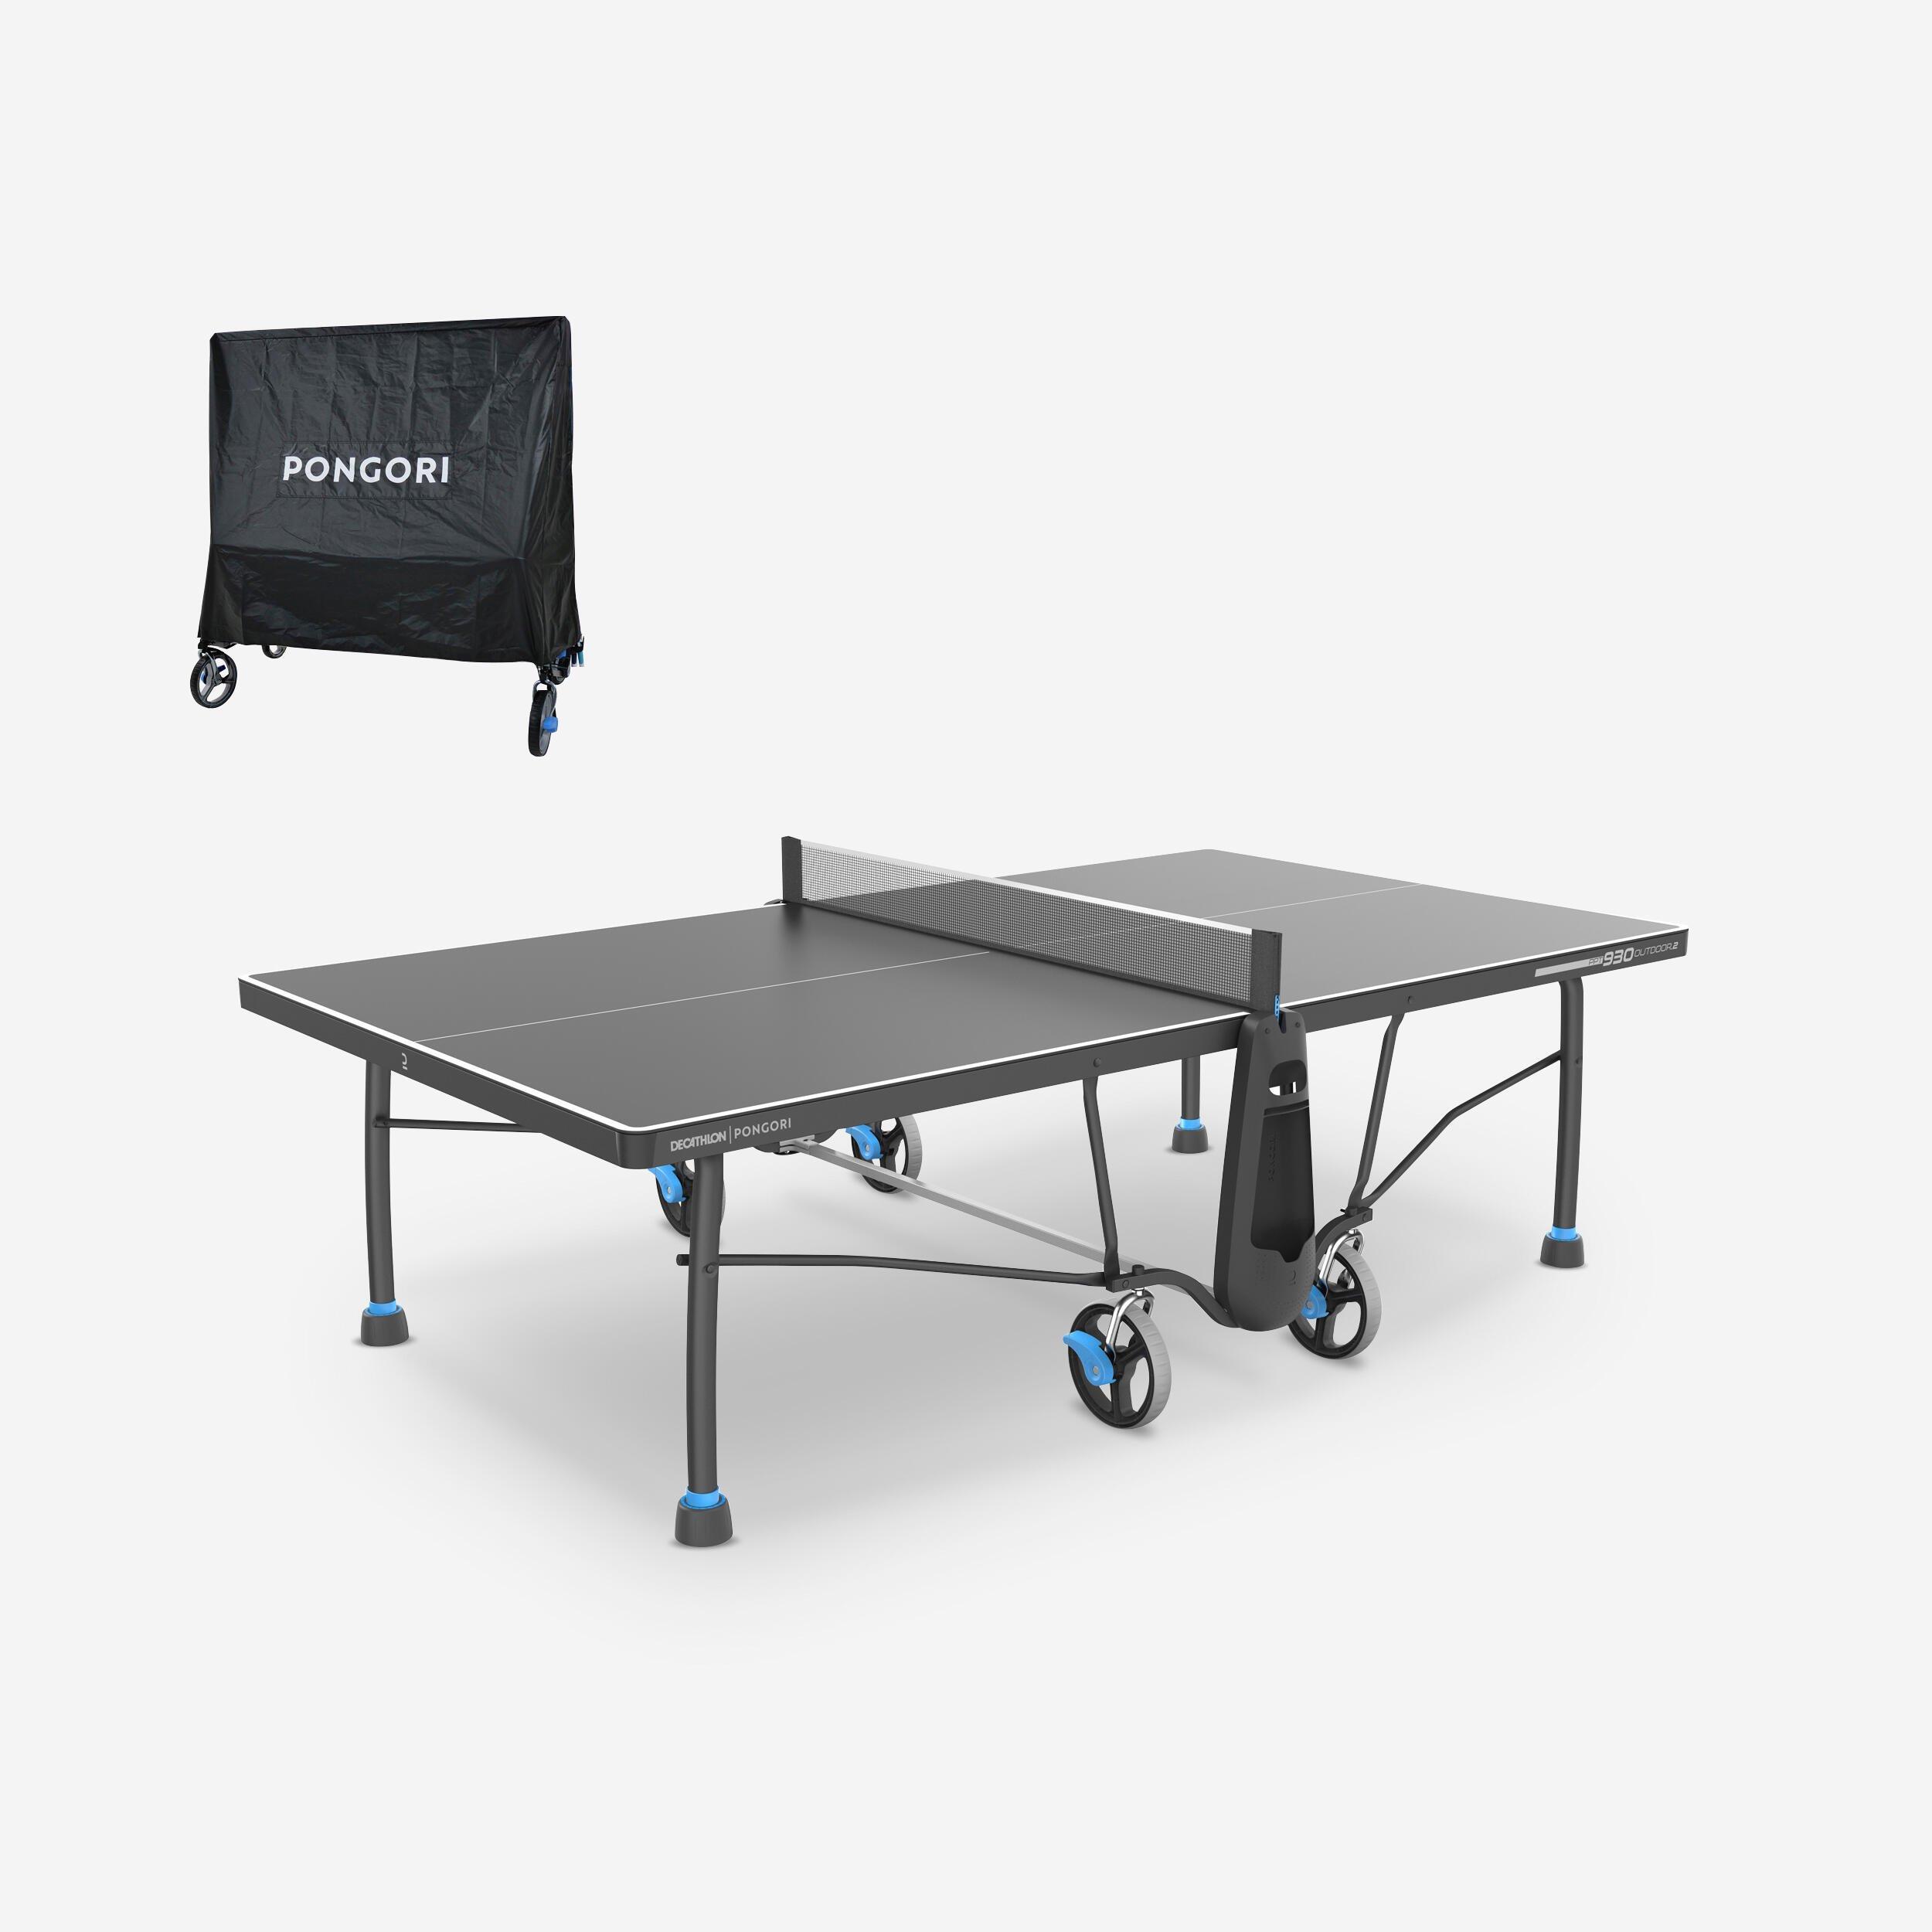 Decathlon Outdoor Table Tennis Table Ppt 930.2 With Cover